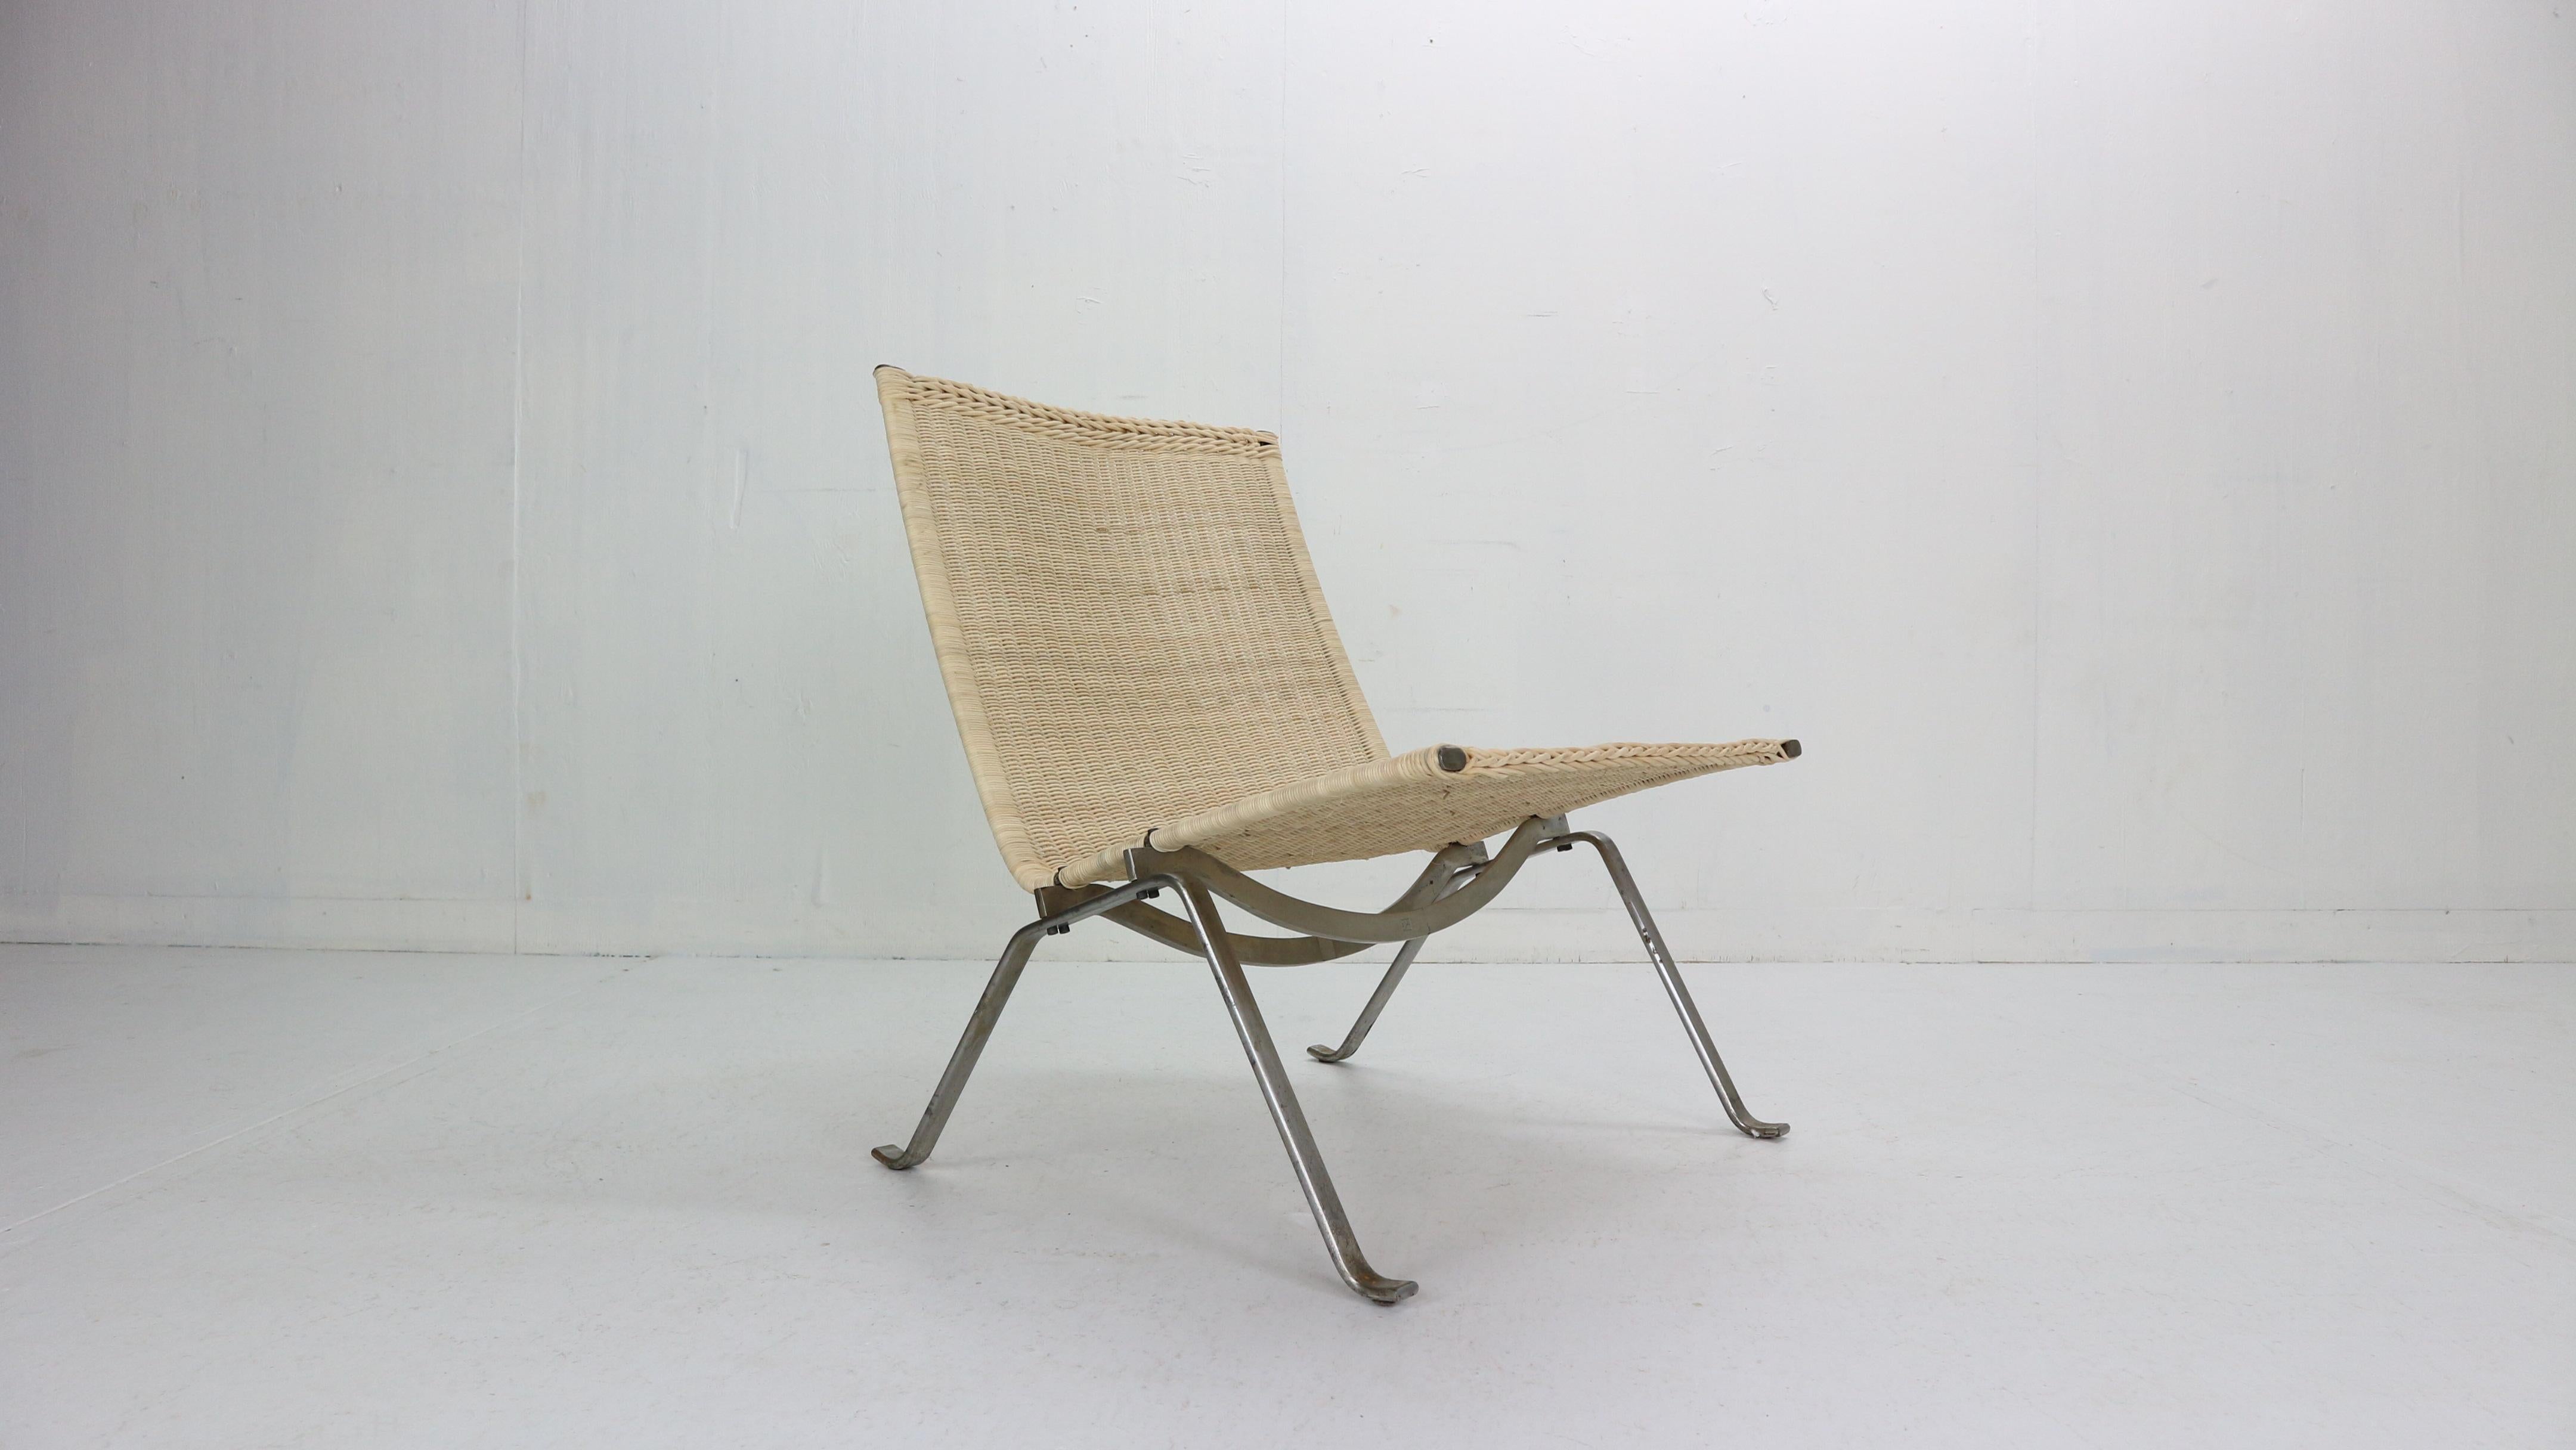 Original first edition PK22 easy chair designed by Poul Kjaerholm for E. Kold Christensen, Denmark, 1956.
Marked in the frame underneath the seat with the EKC logo.

The PK22 chair followed the PK25 lounge chair — completed by Kjærholm while he